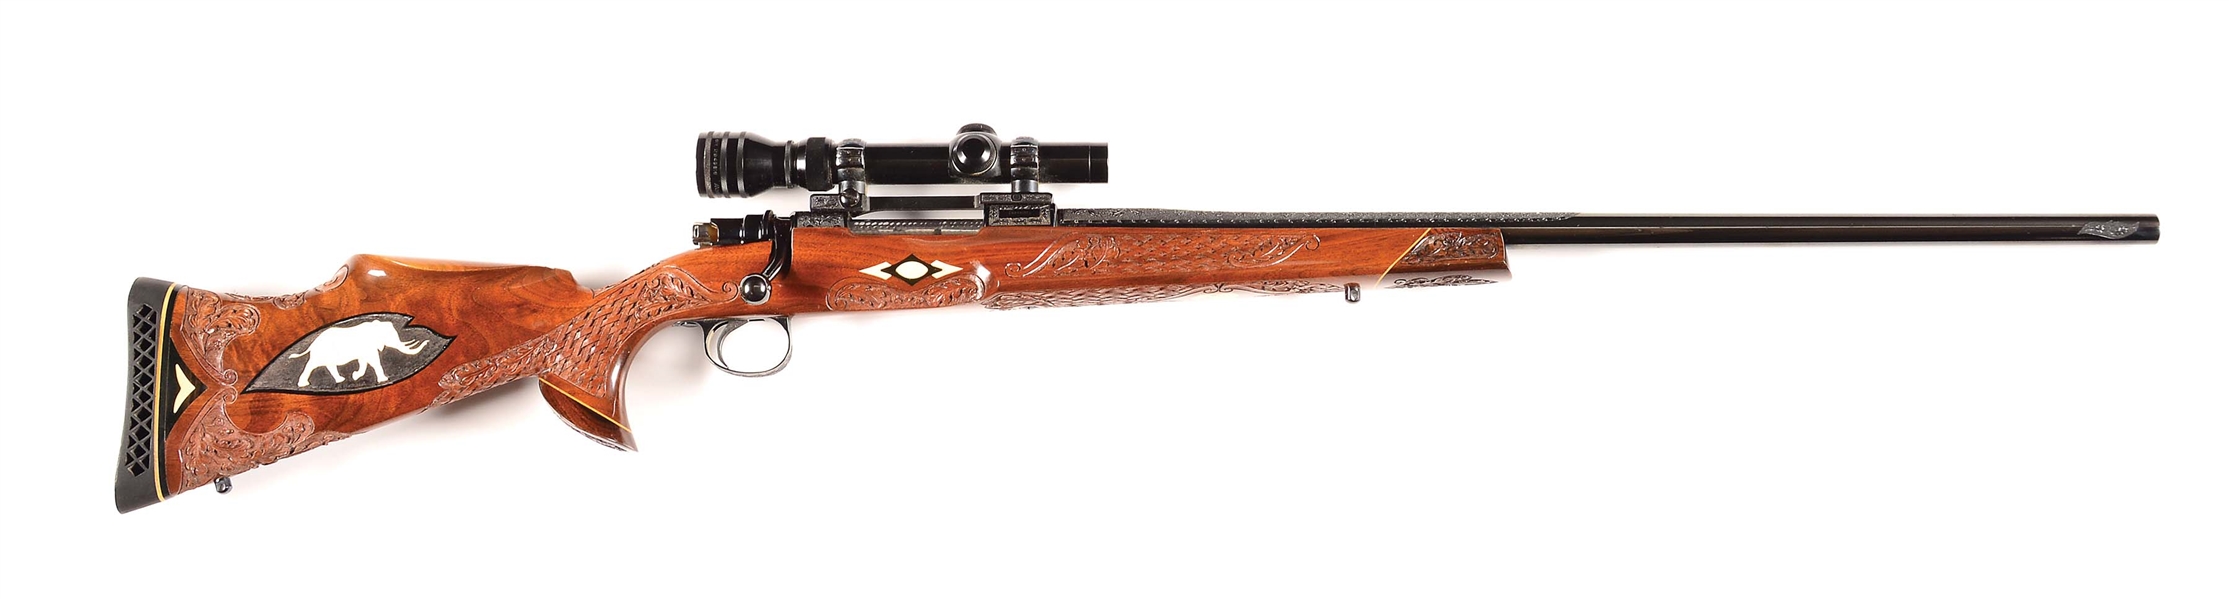 (C) WINSLOW ARMS CO. MODEL IMPERIAL BOLT ACTION RIFLE.